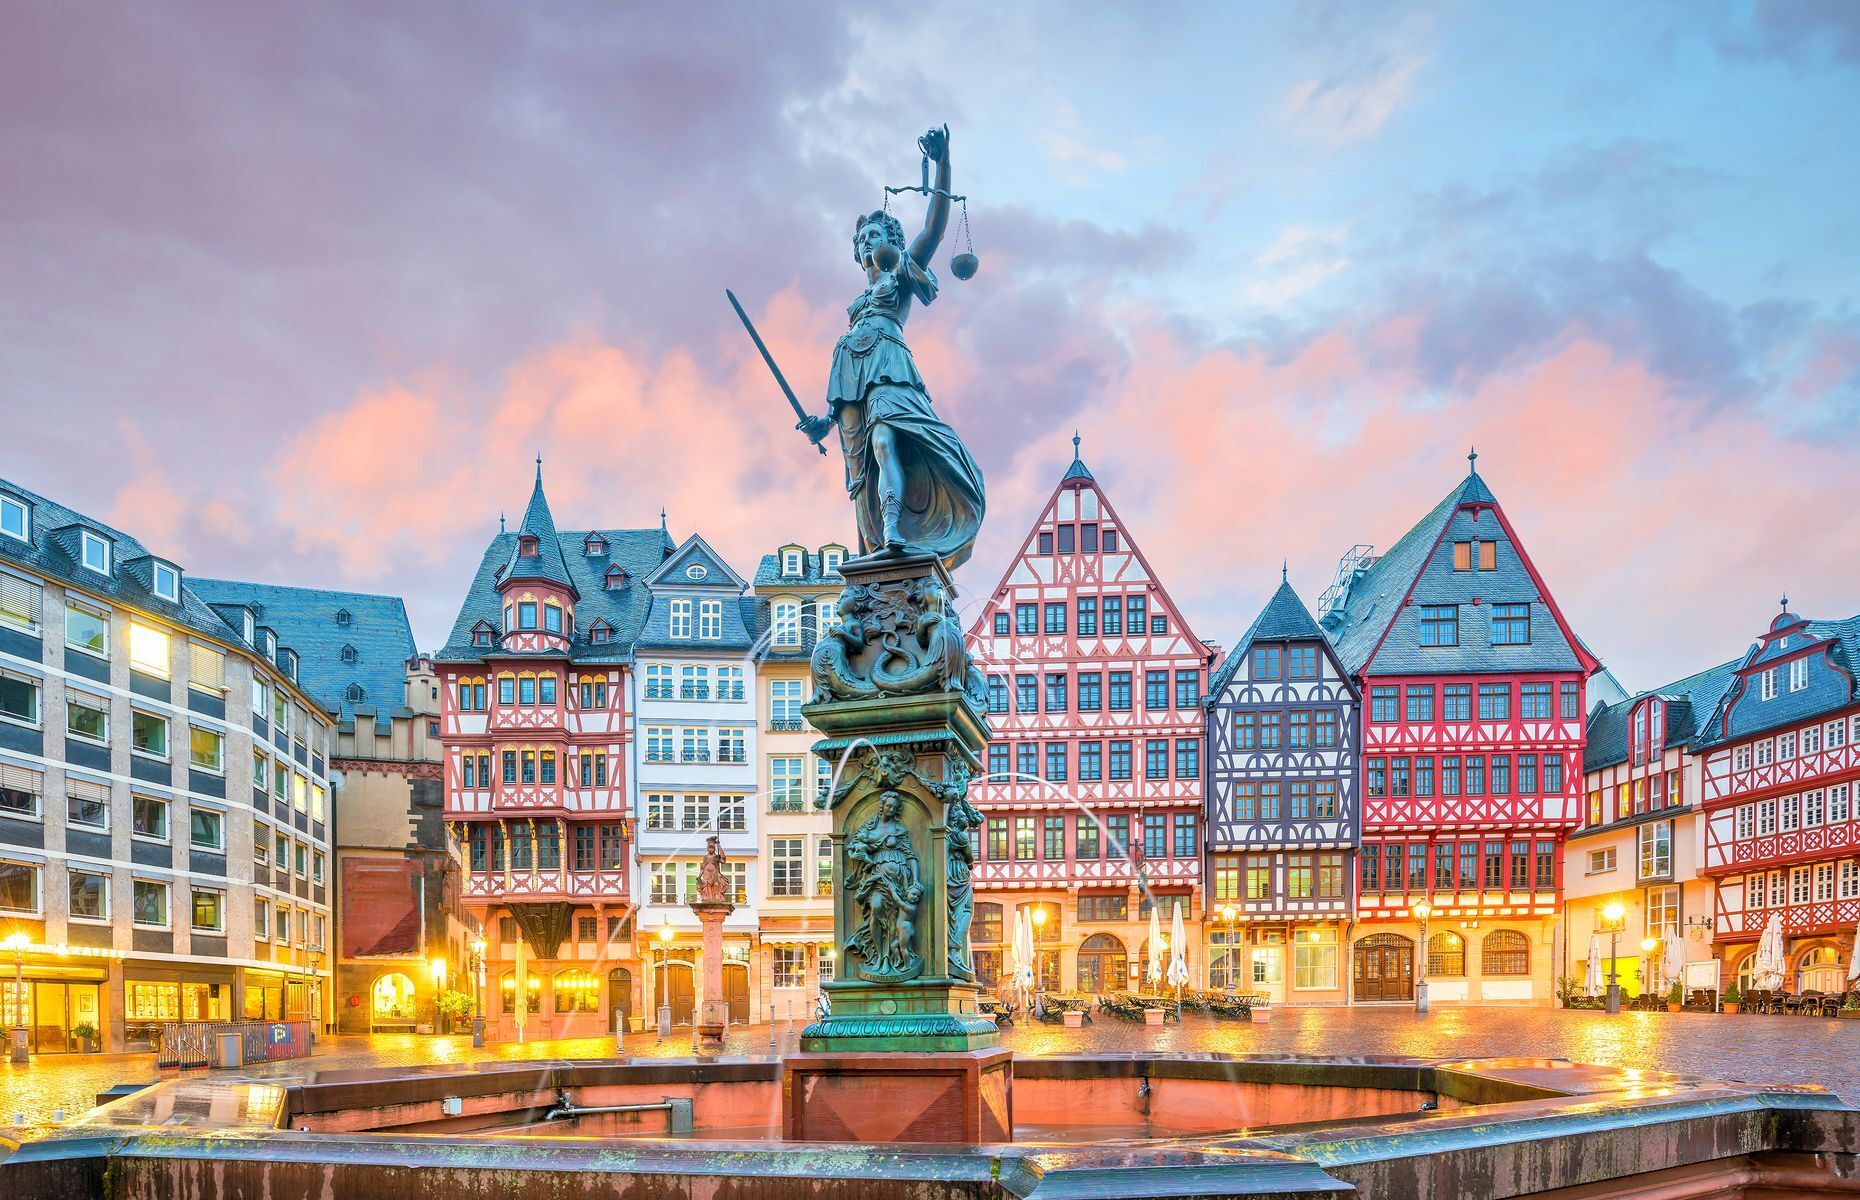 From medieval cities to mysterious forests, Germany remains an intriguing country, as much for its tumultuous history as for its beauty. Discover 20 incredible places to visit in Germany.